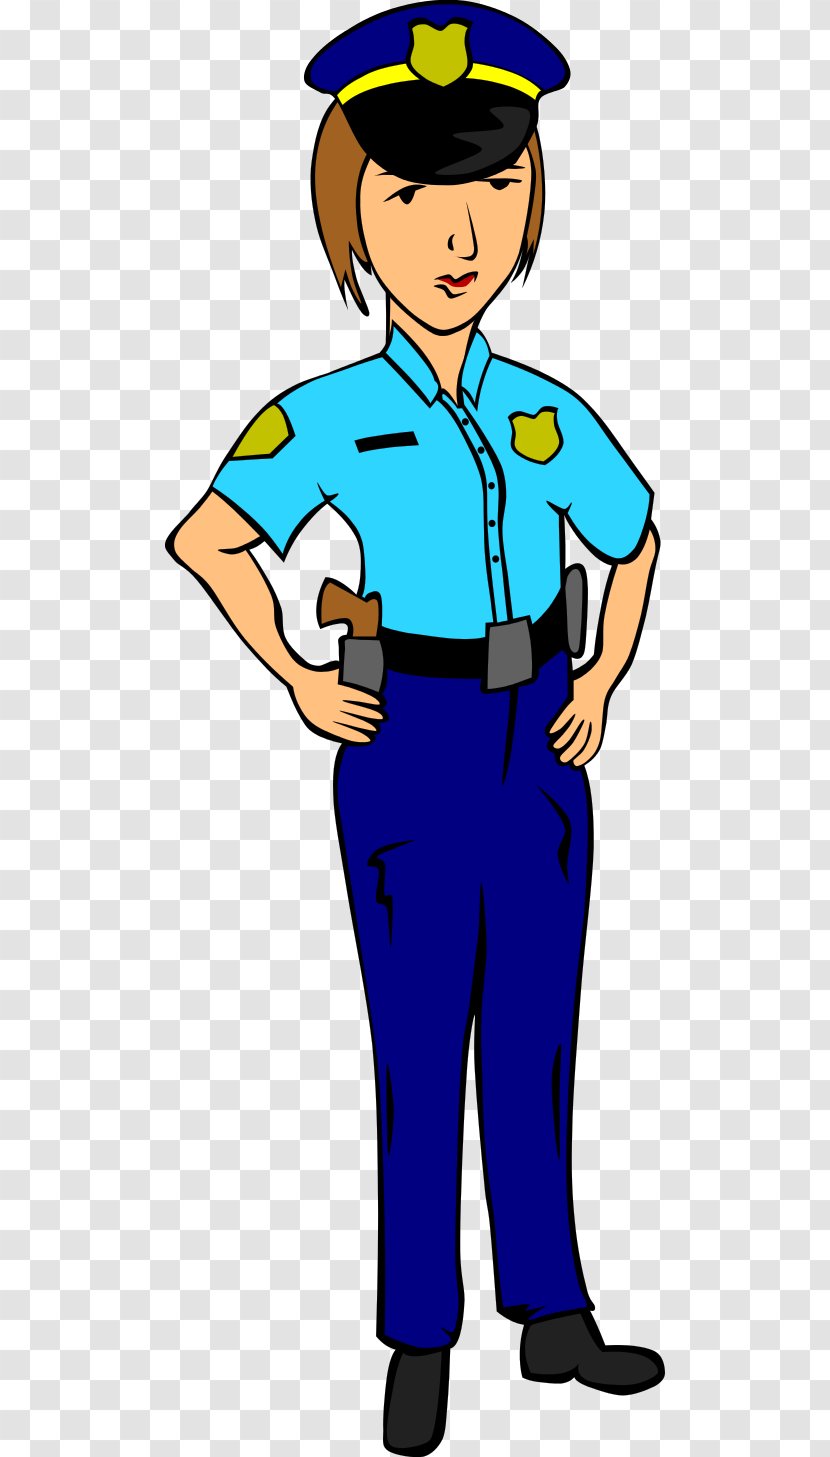 Police Officer Woman Clip Art - Male - Cartoon Pictures Of Officers Transparent PNG